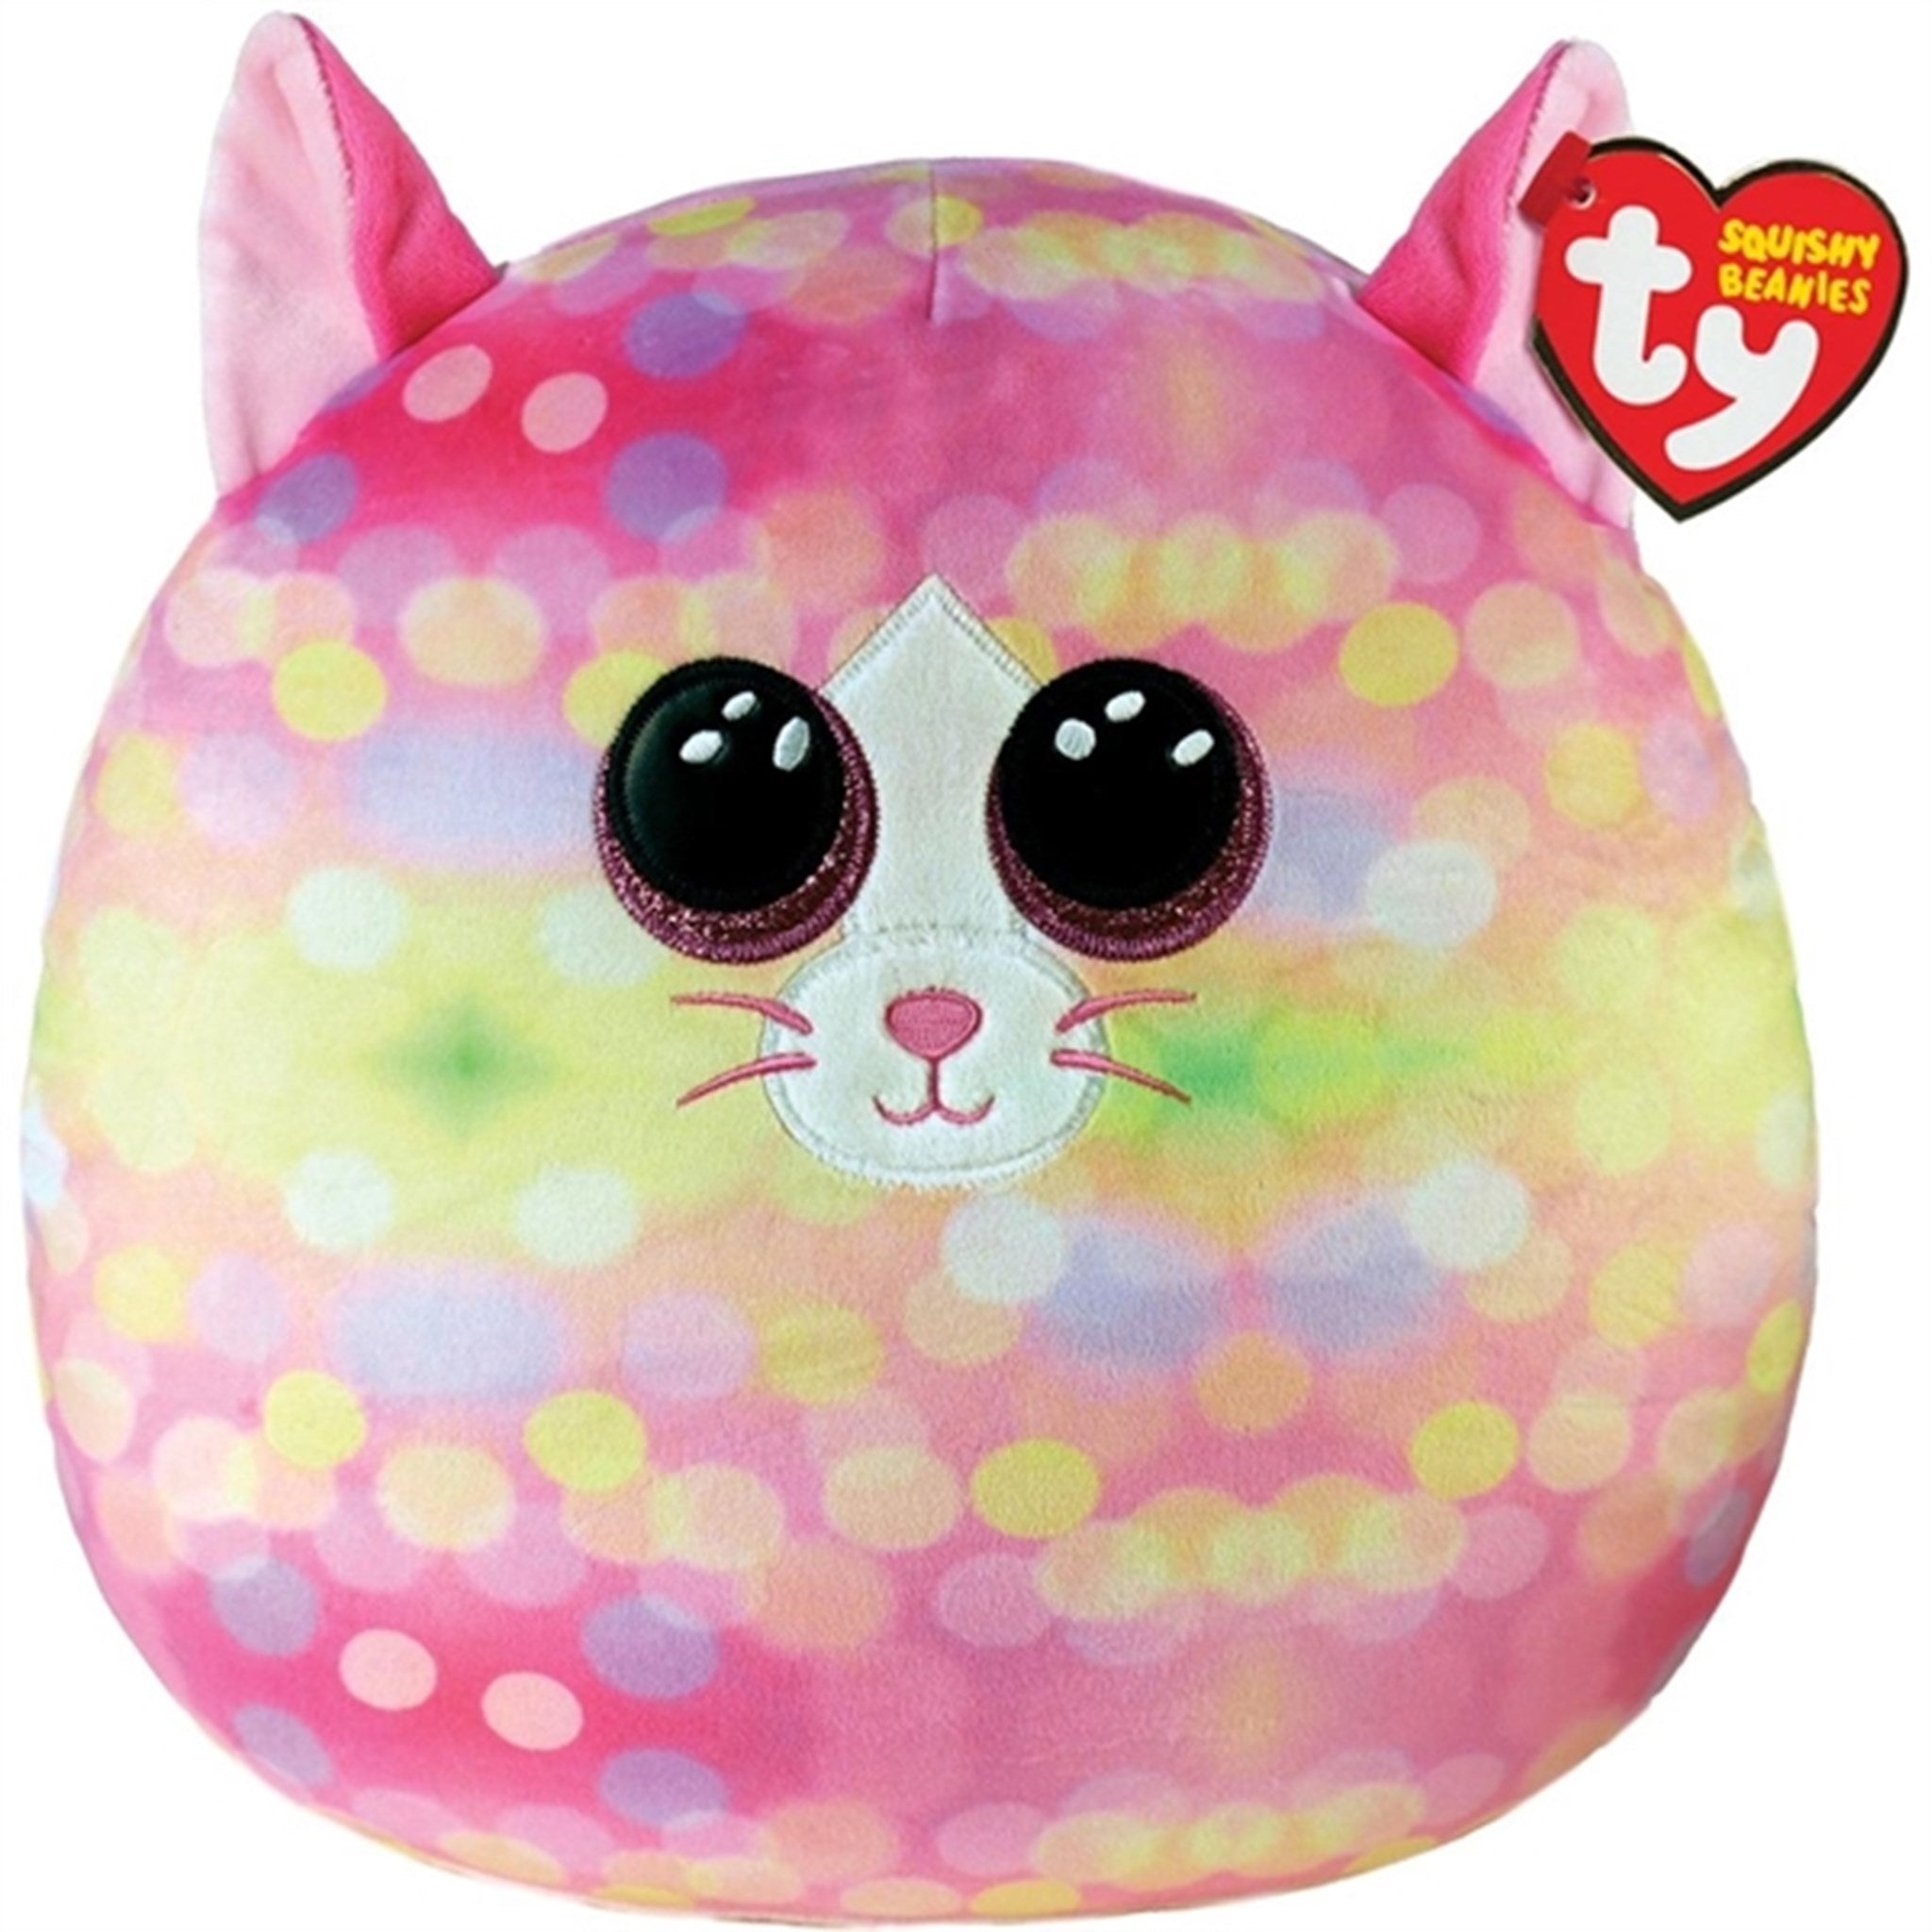 TY Squishy Beanies Sonny - Pink Pattern Cat Squish 25cm